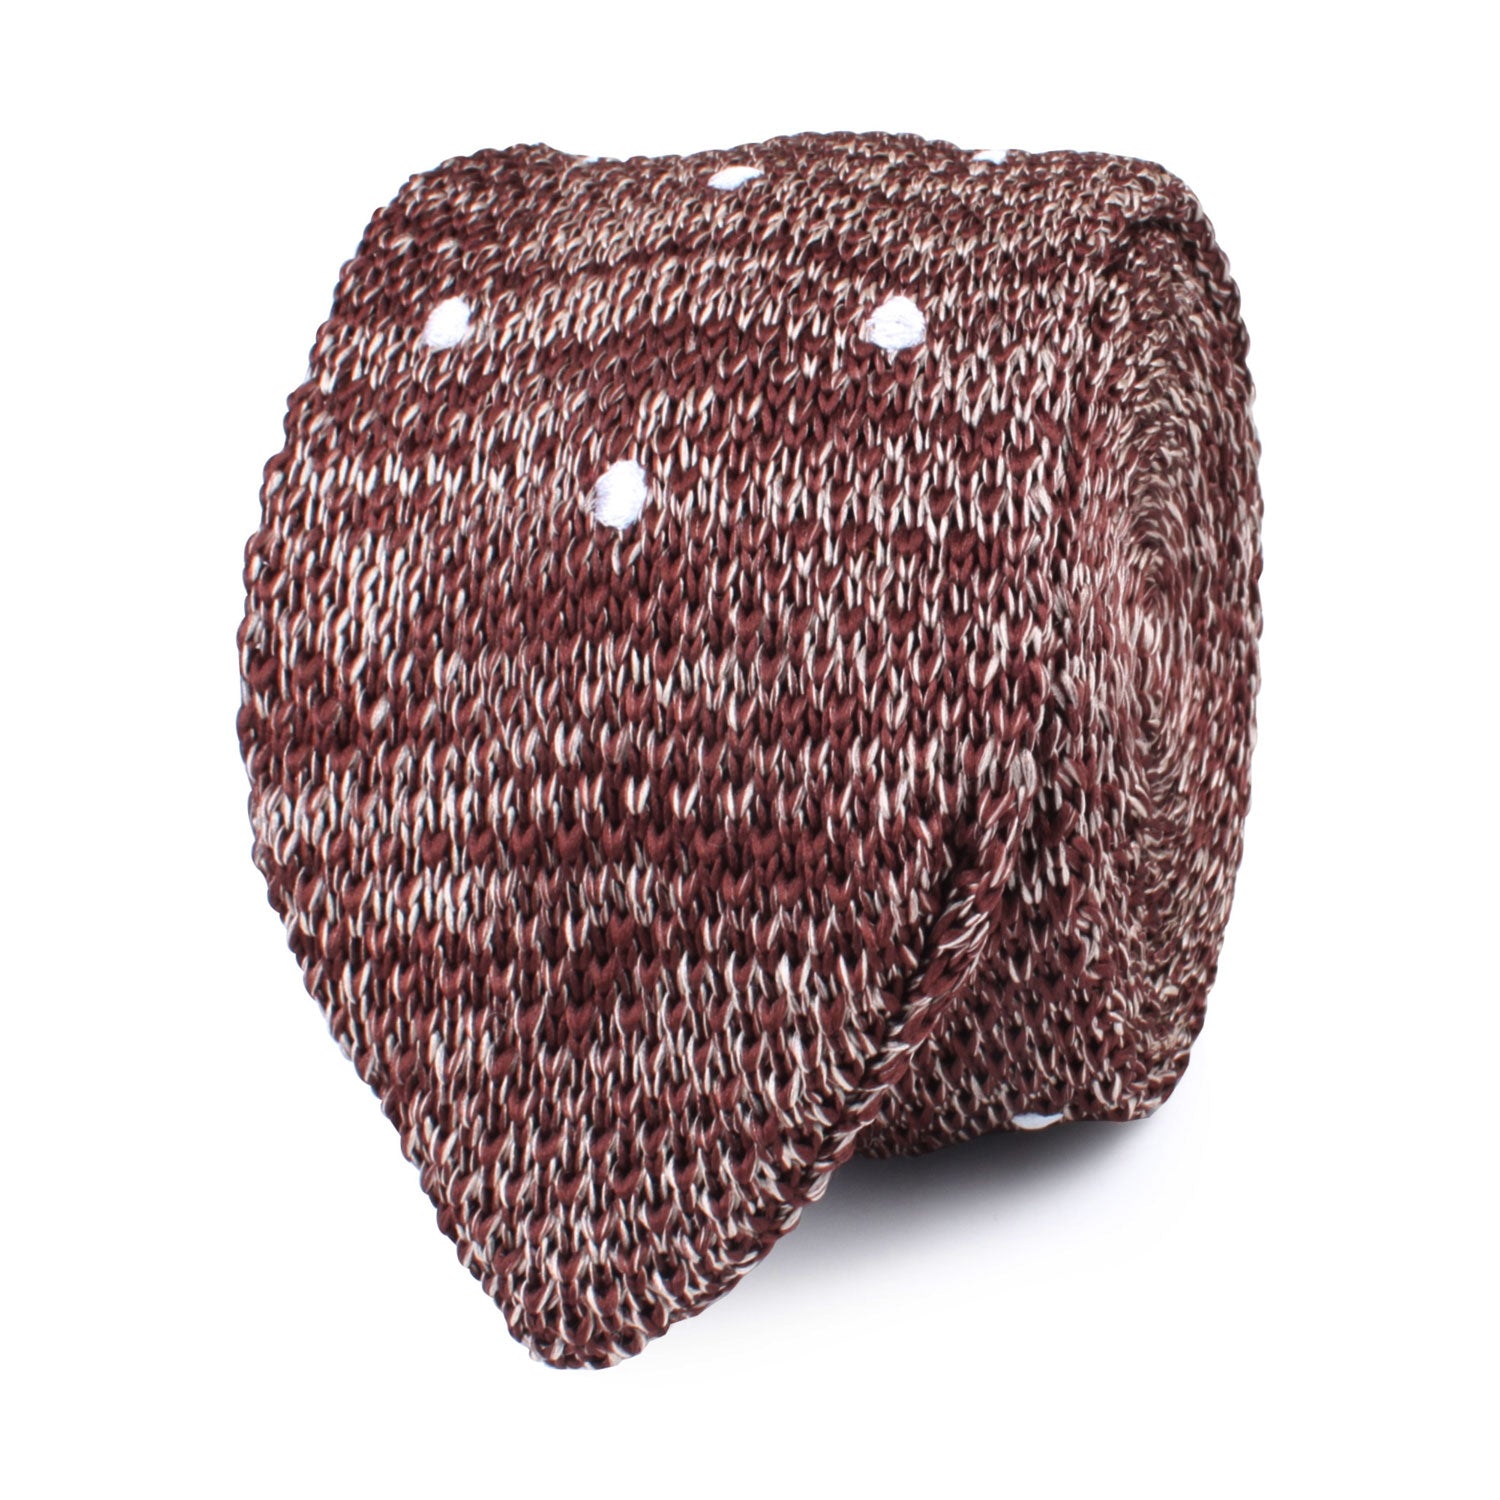 Cambay Brown Polka Dot Knitted Tie